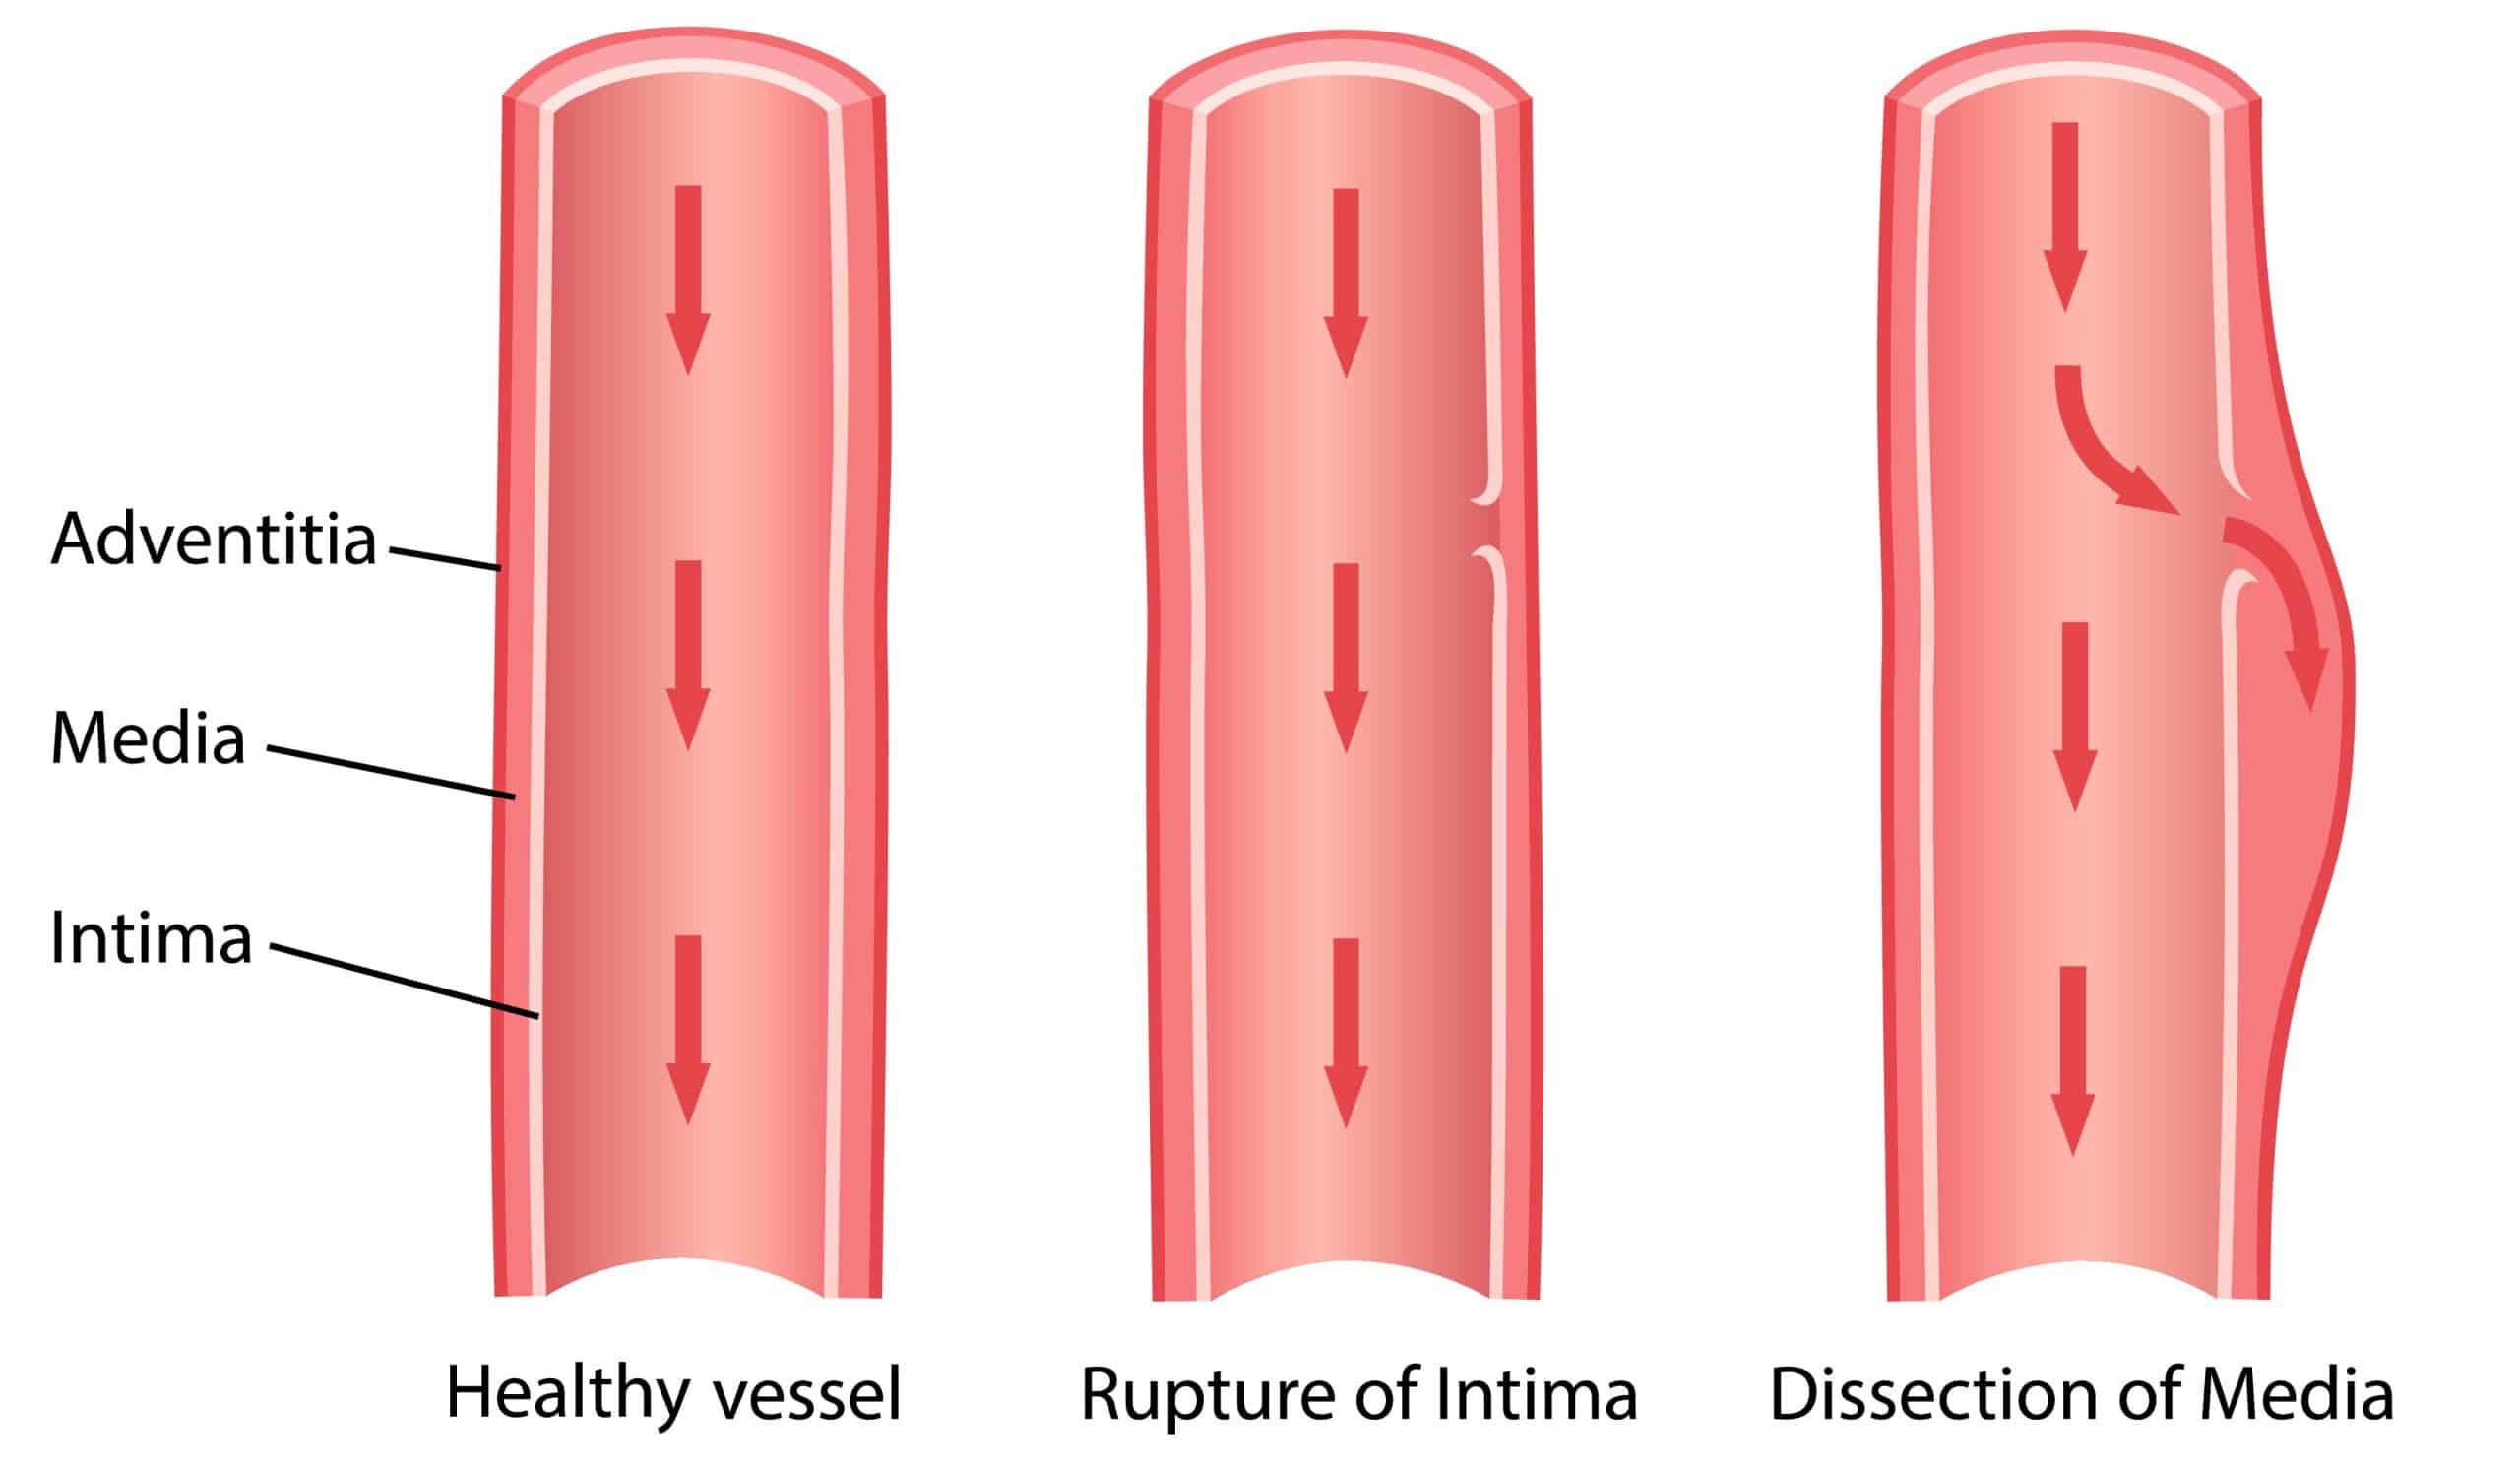 irad aortic dissection classification